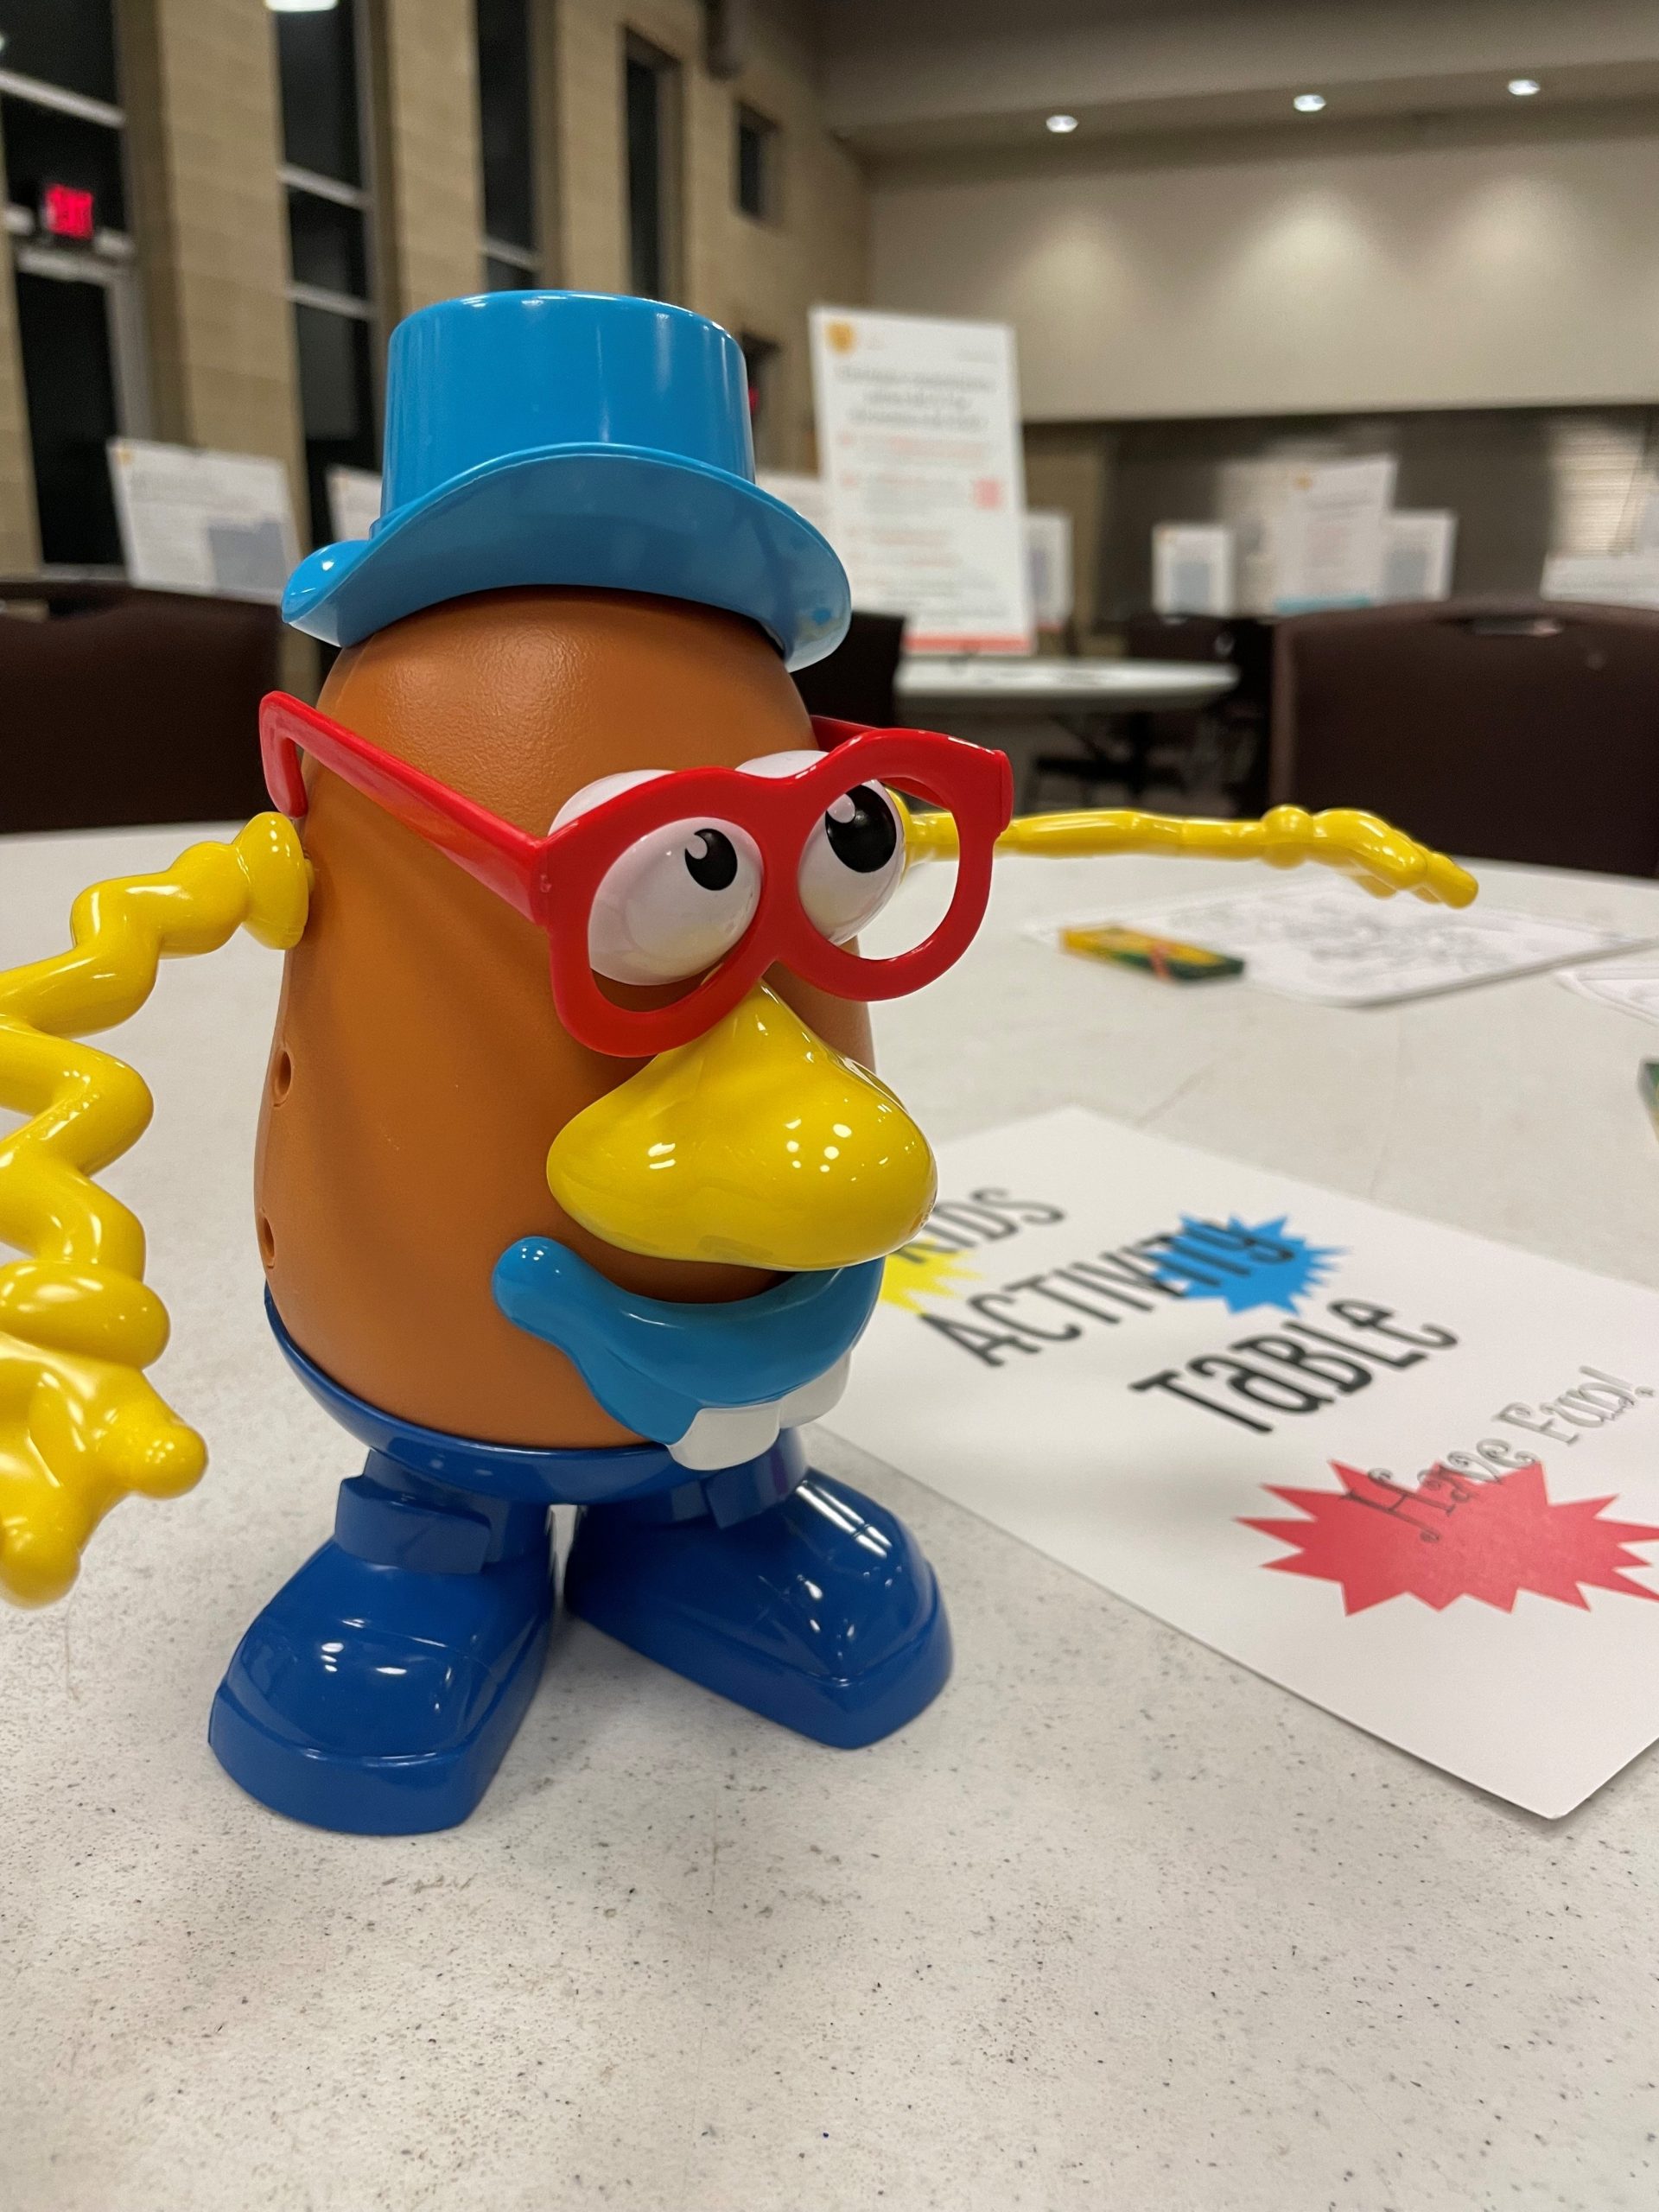 Mr. Potato Head at the kids activity table in a public meeting, November 2023